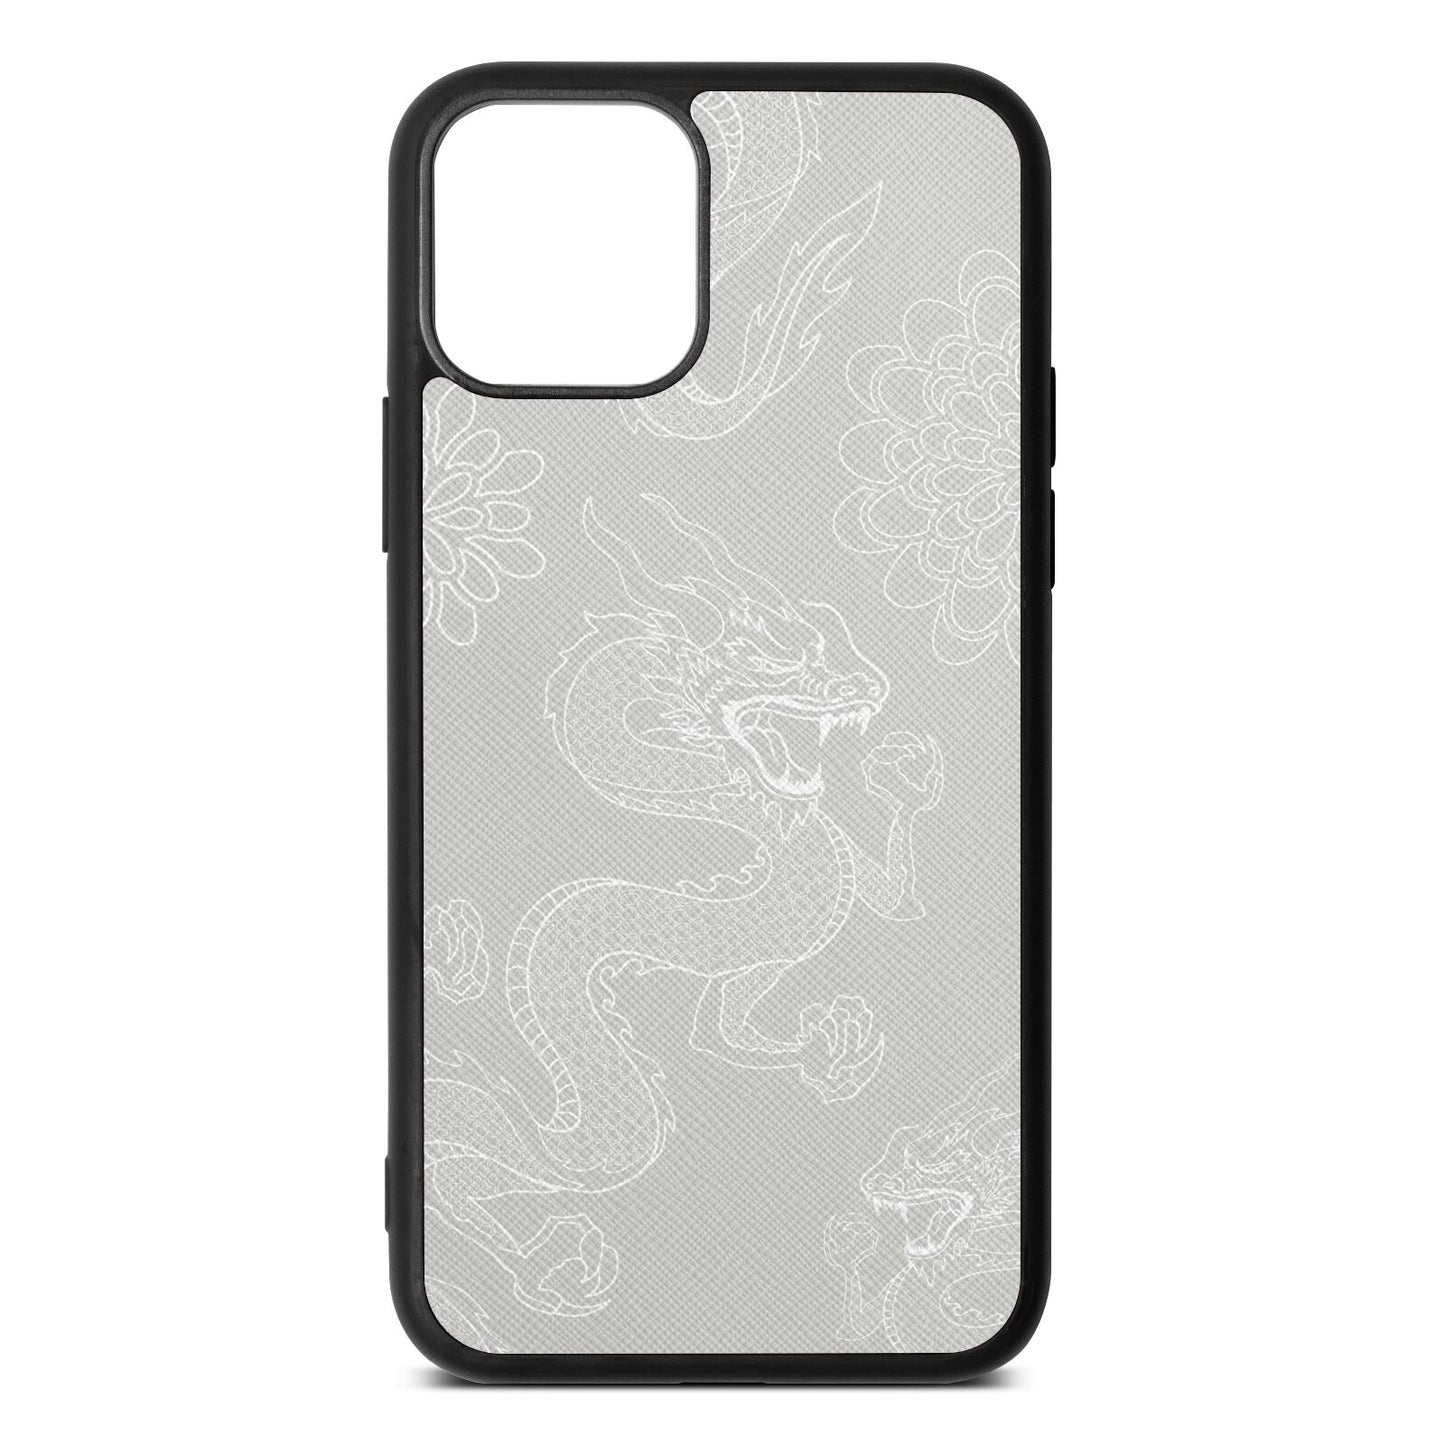 Dragons Silver Saffiano Leather iPhone 11 Case